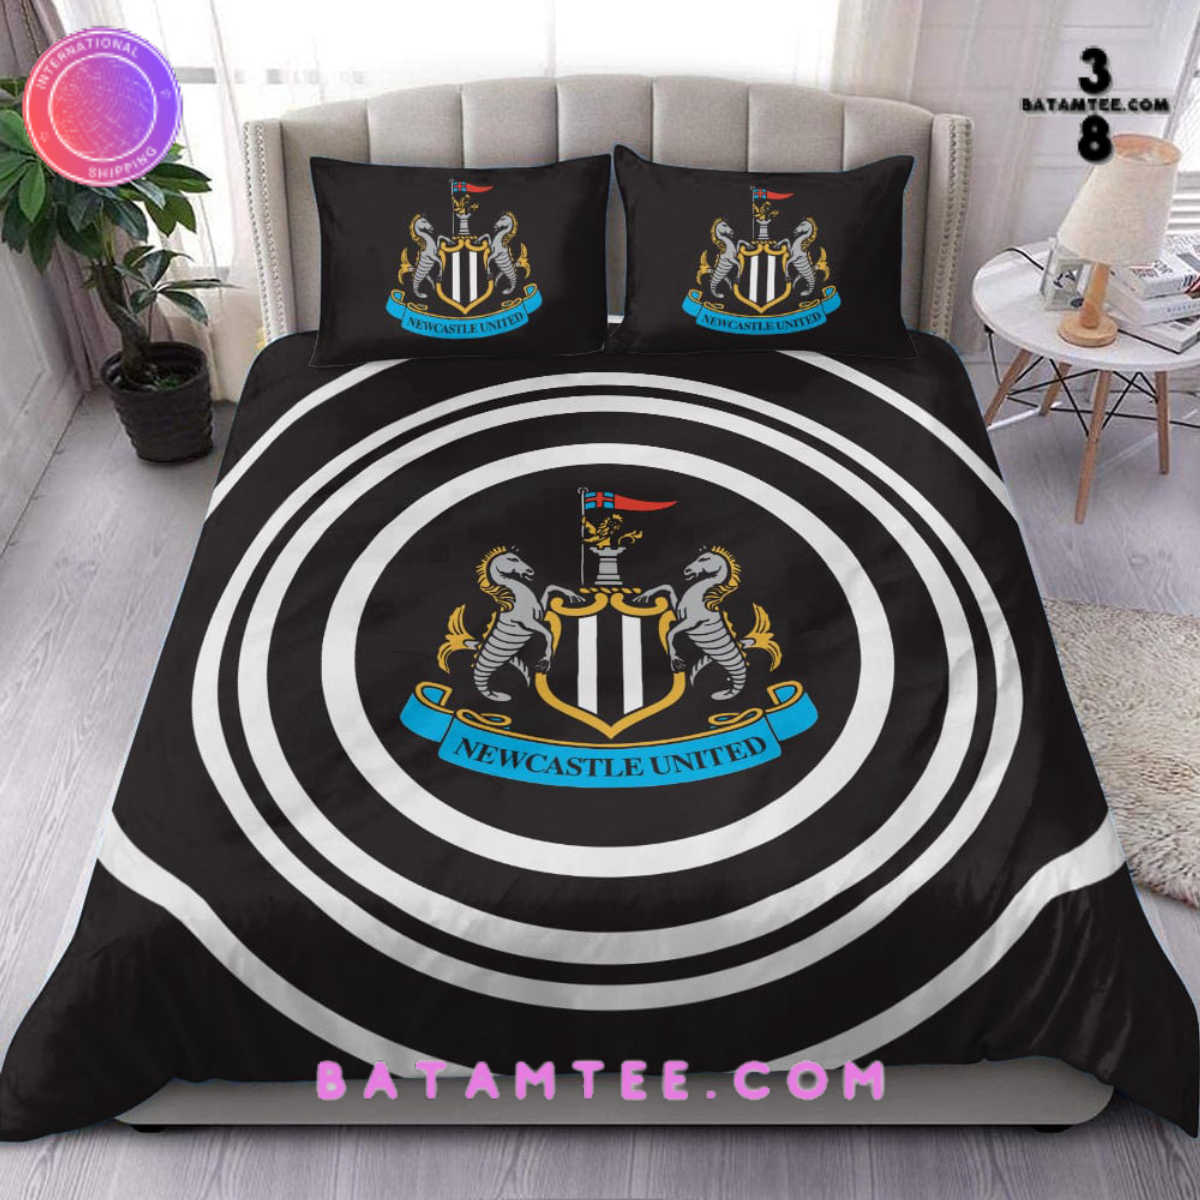 Bedding Set collection for Newcastle United FC fans-Limited Edition's Overview - Batamtee Shop - Threads & Totes: Your Style Destination